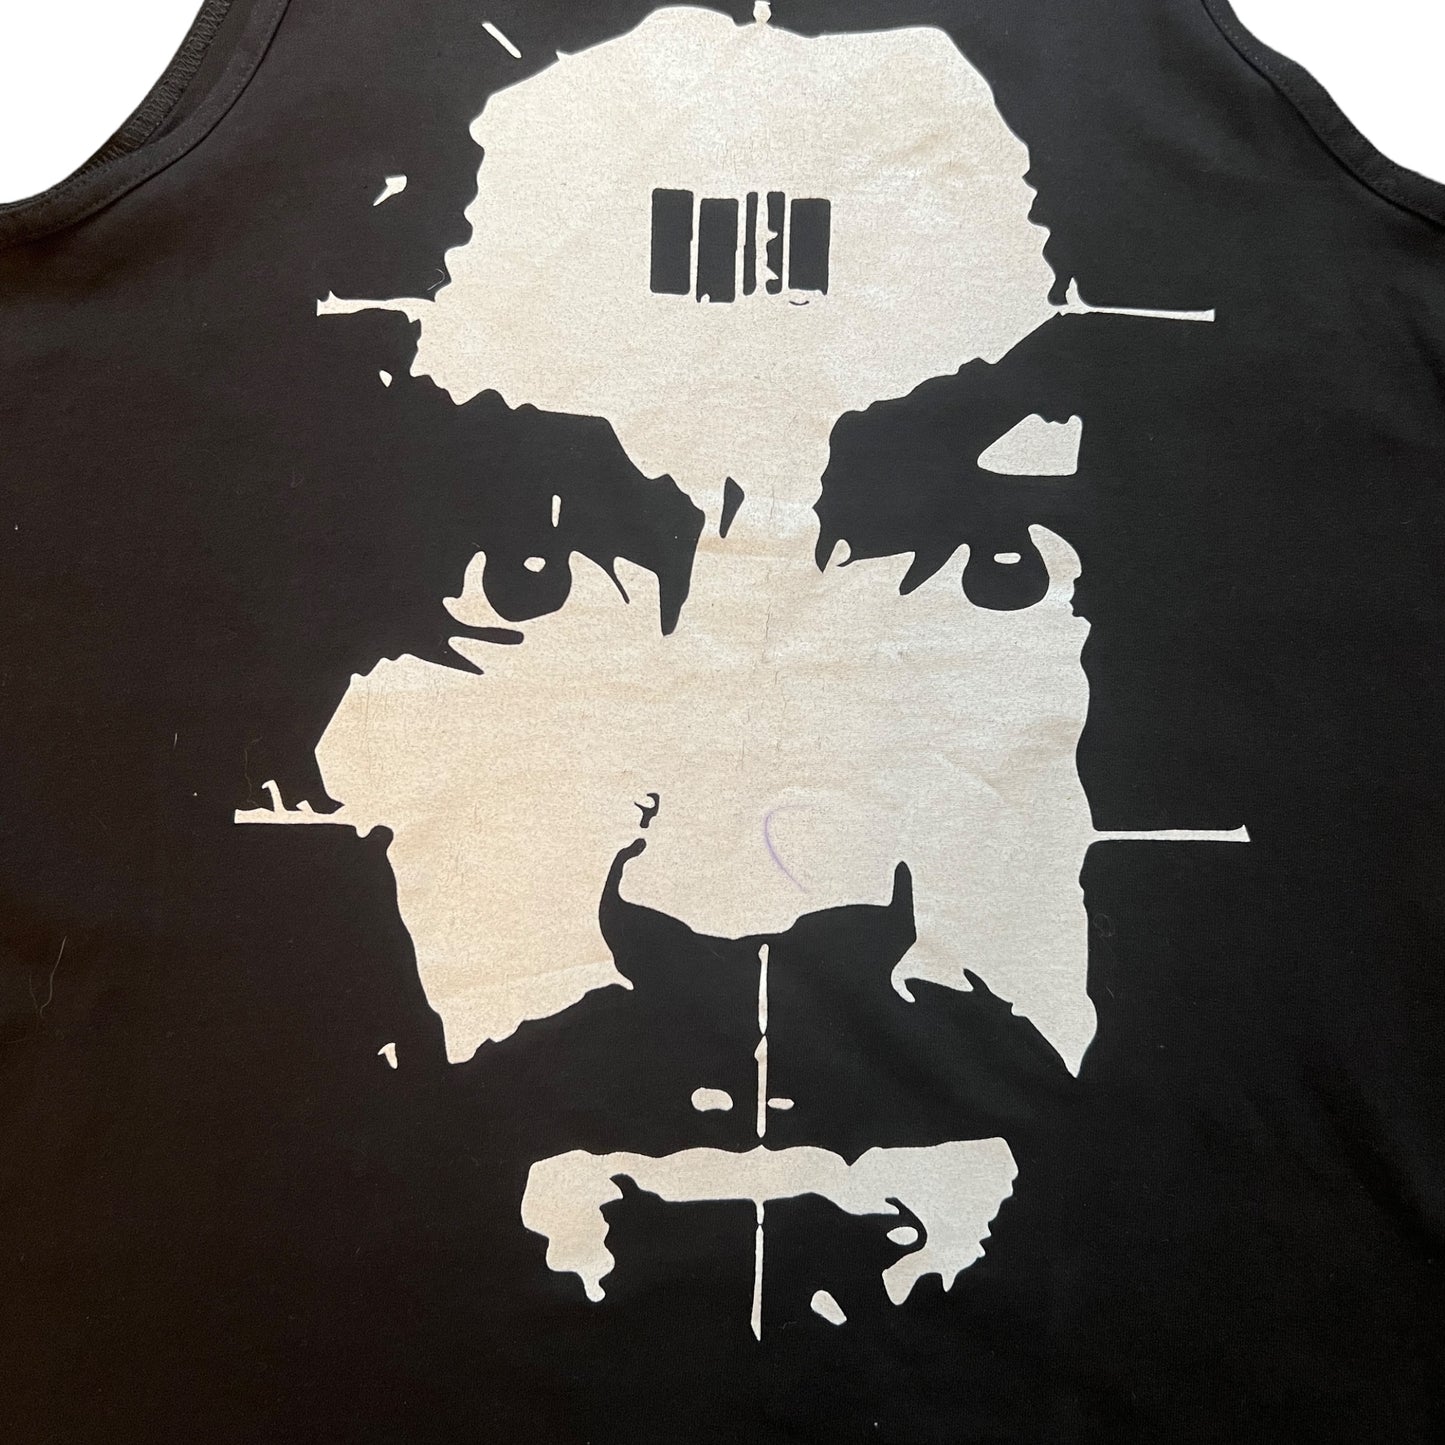 Lost And Found Bootlegs Manson Black Flag RIP Tank Top T-Shirt Size XL Strife